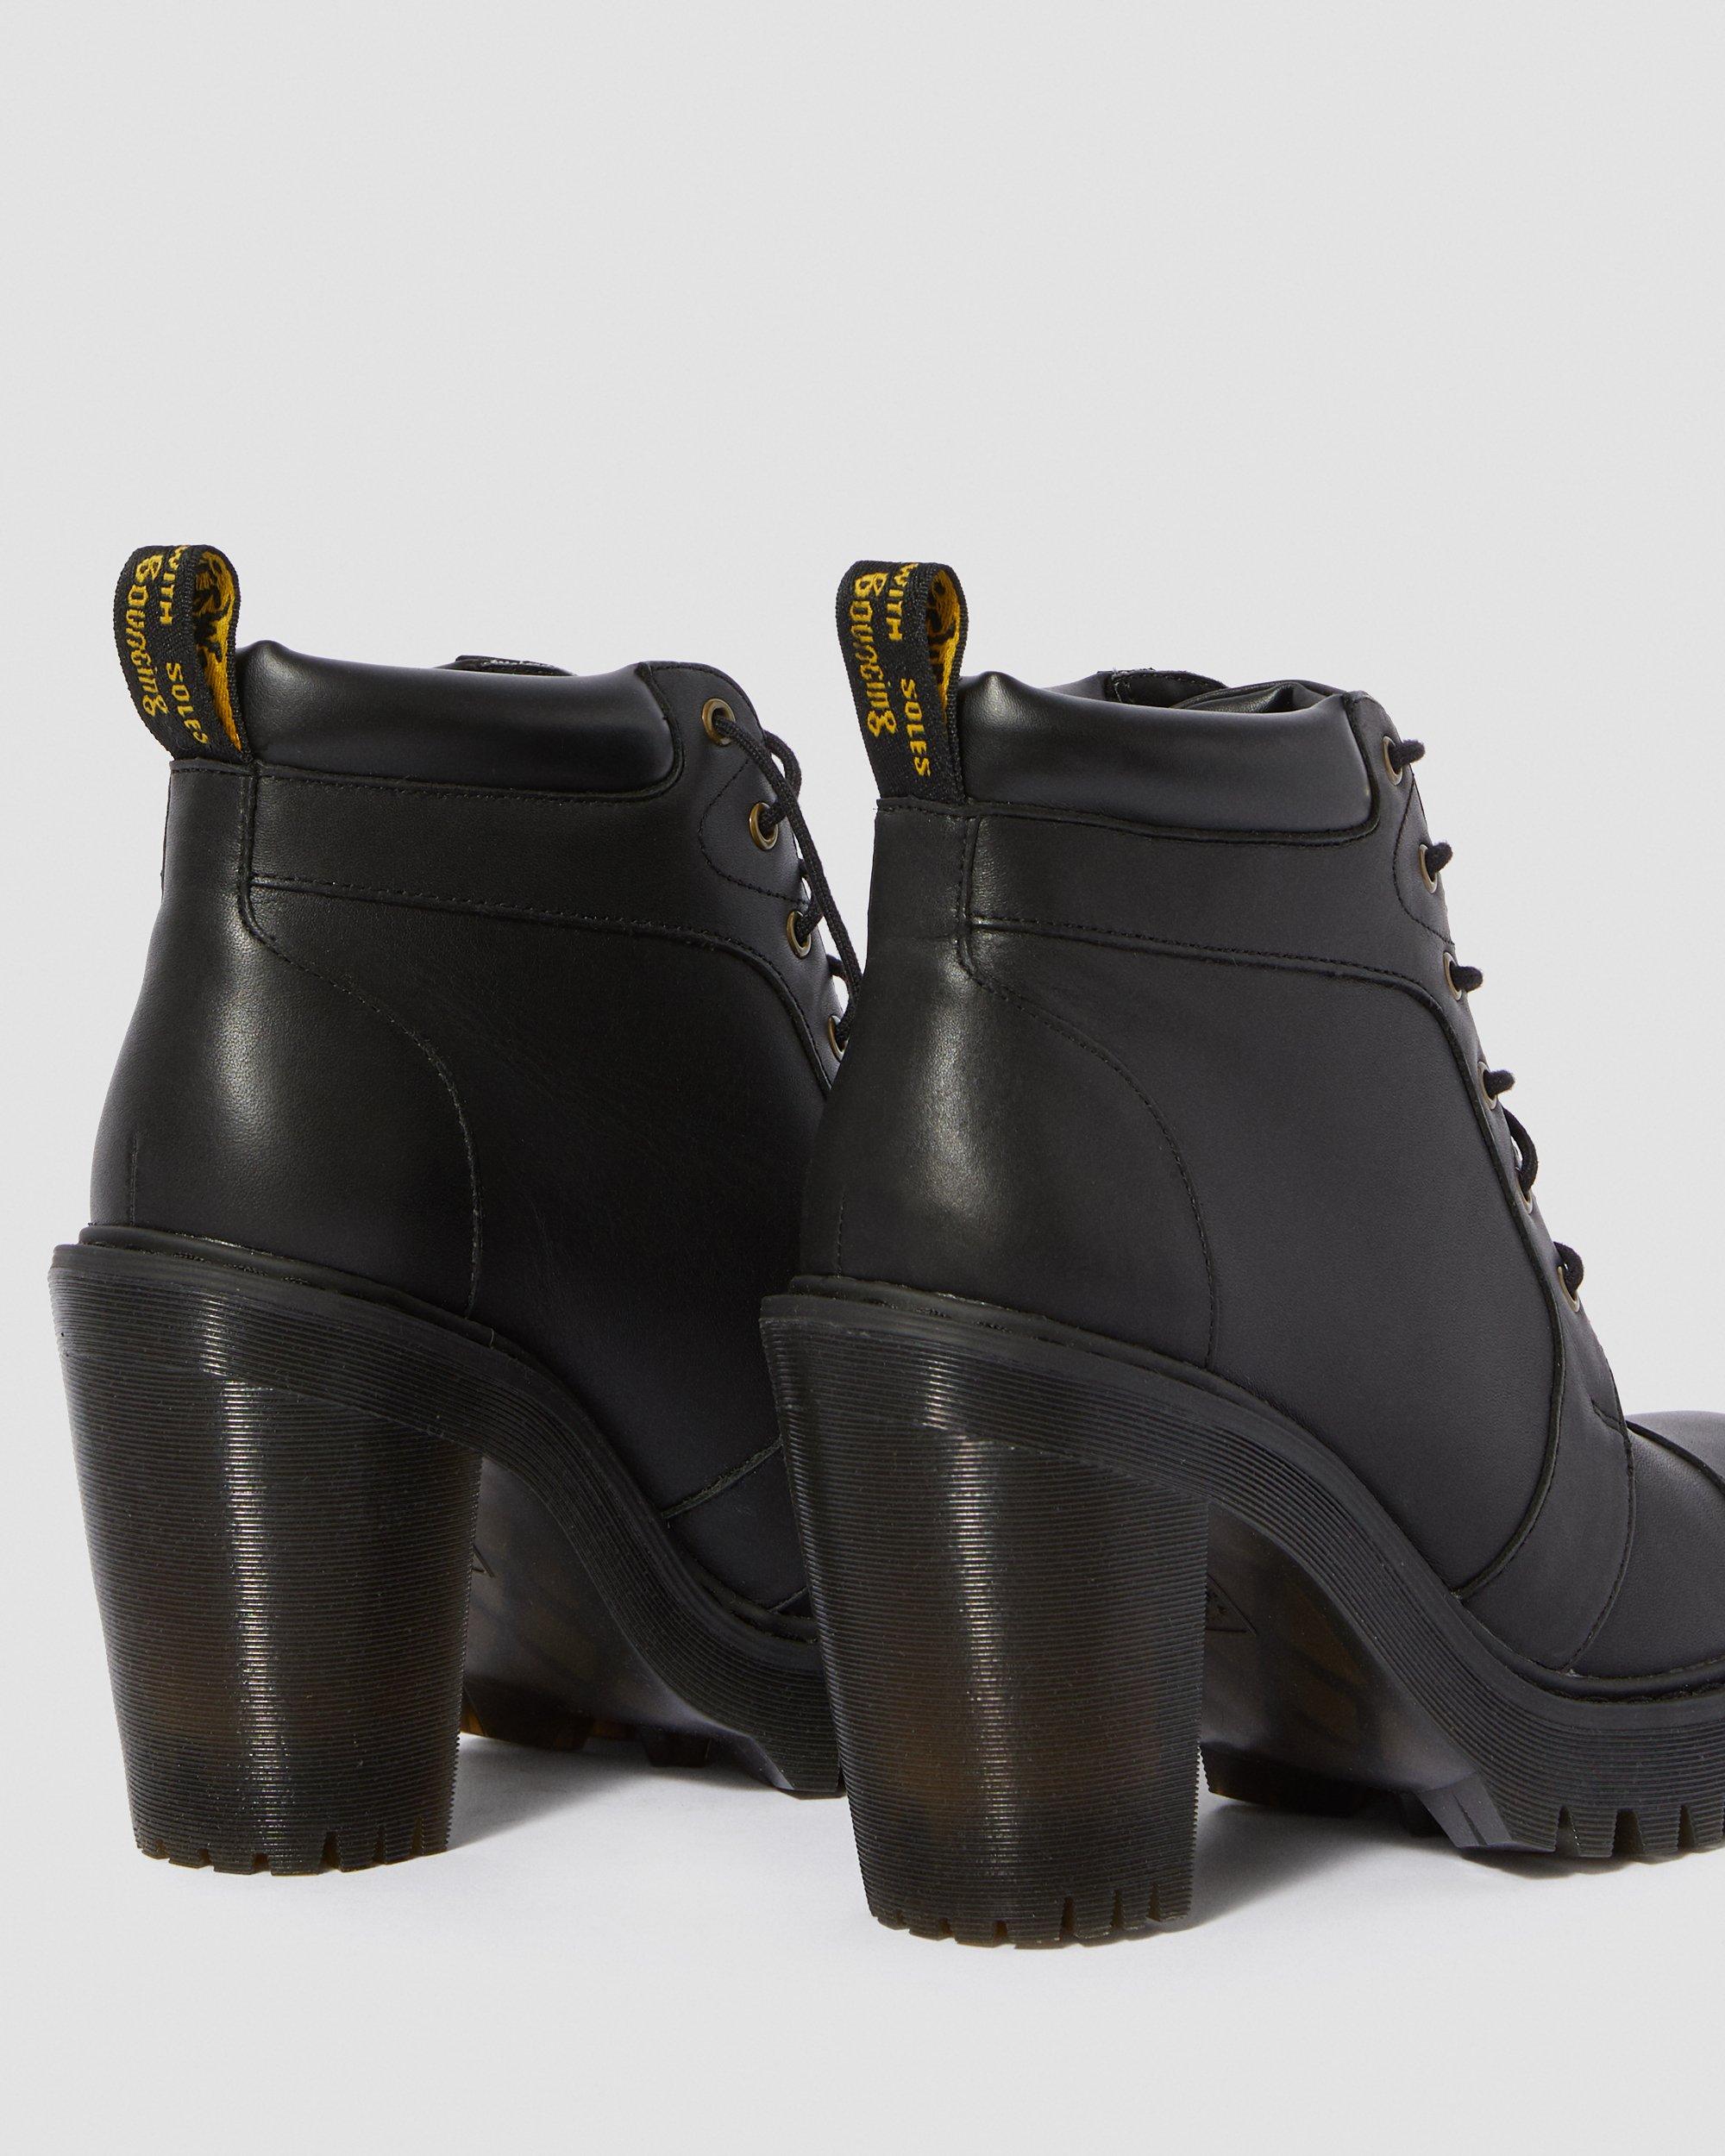 AVERIL LEATHER HEELED ANKLE BOOTS | Dr. Martens